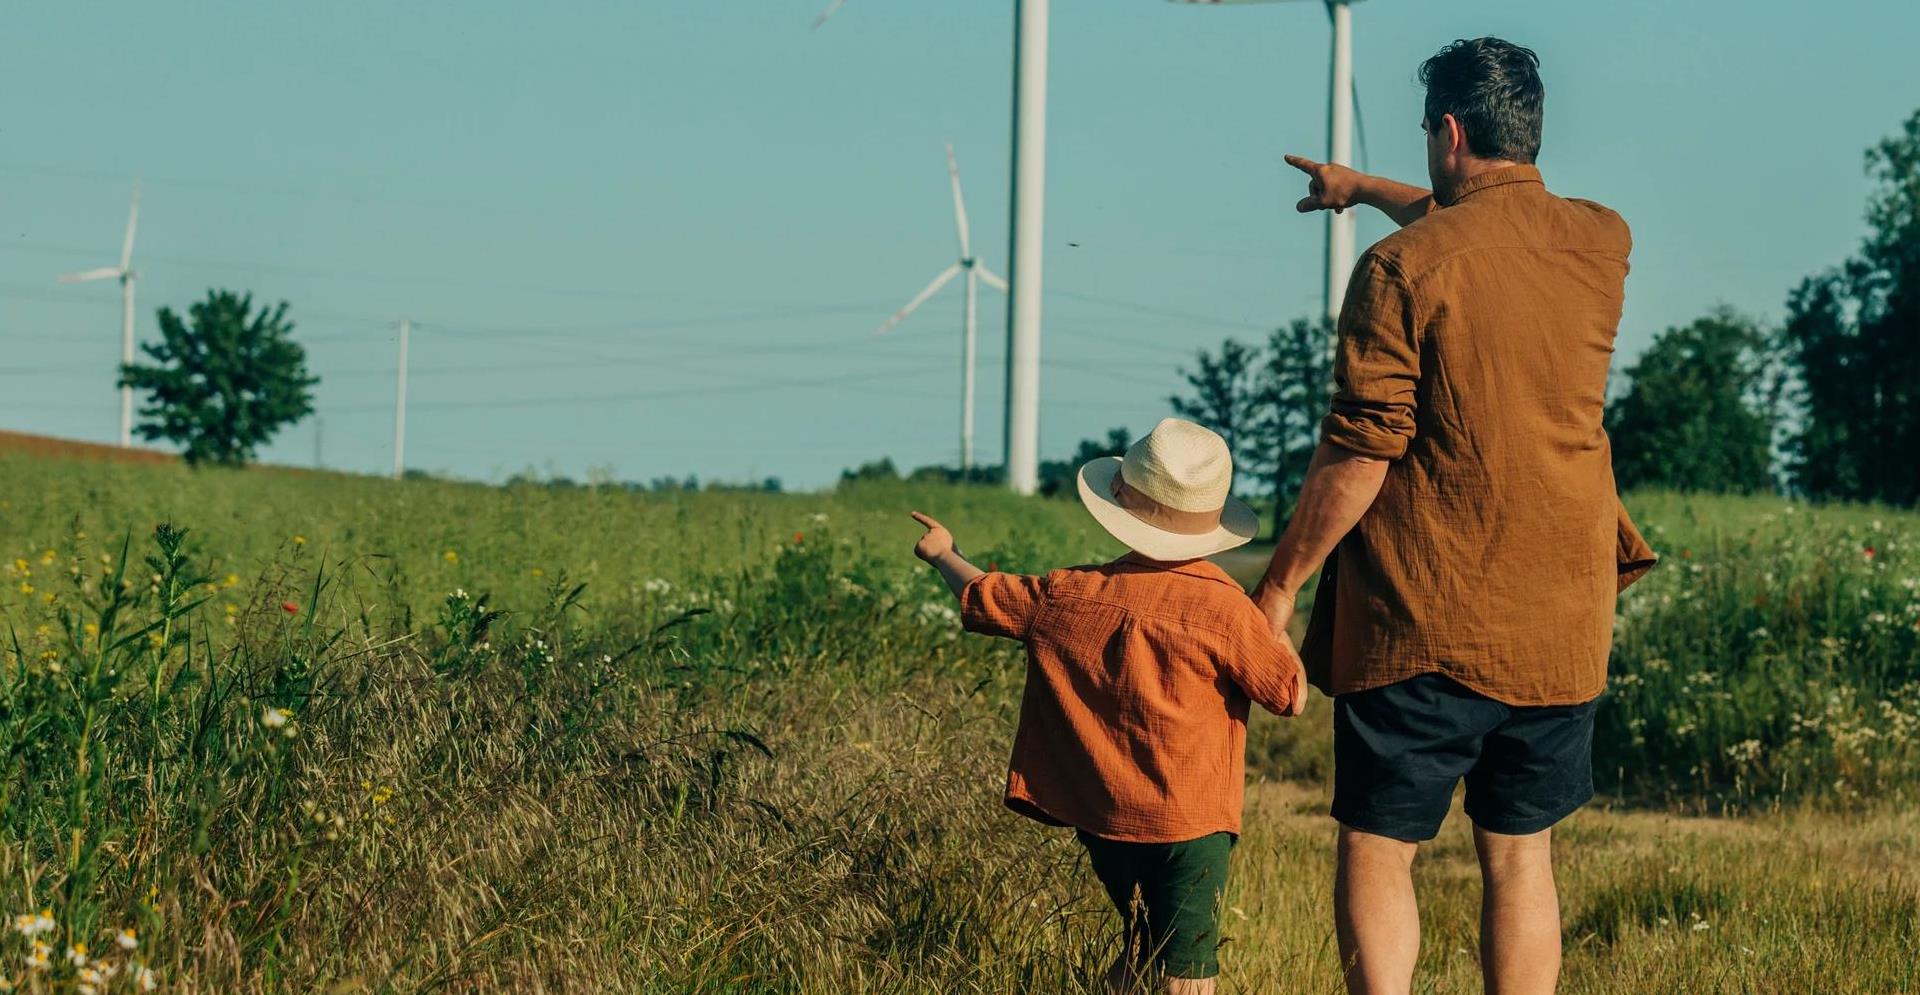 Father and son gesturing towards wind turbines at field